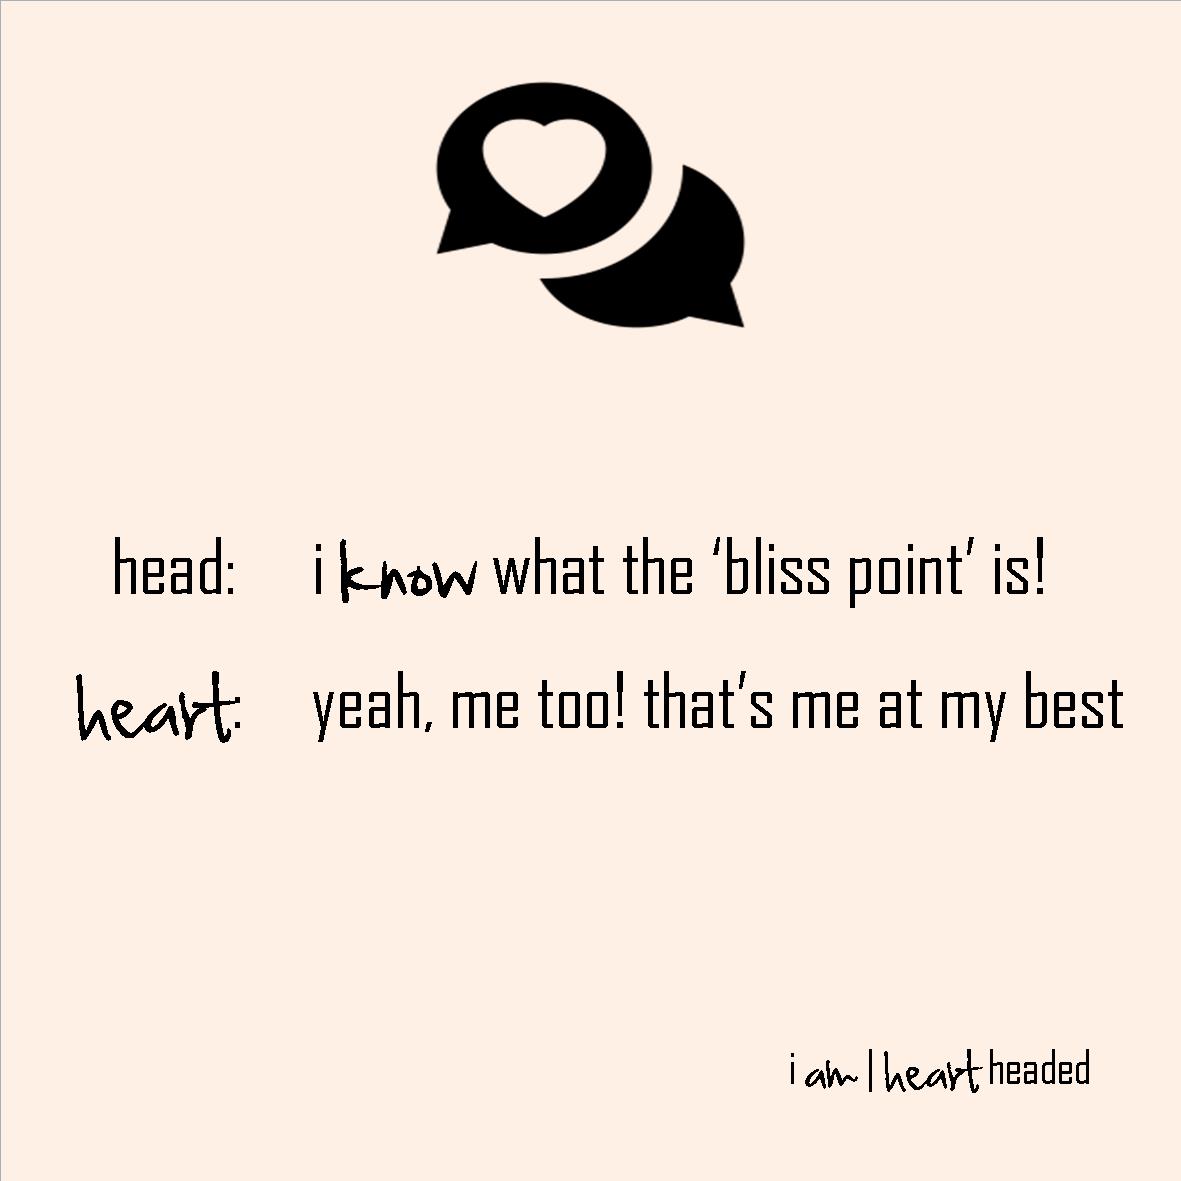 full-size featured image of quote 'heart talk | bliss point' in category 'wacky' at i am | heart headed